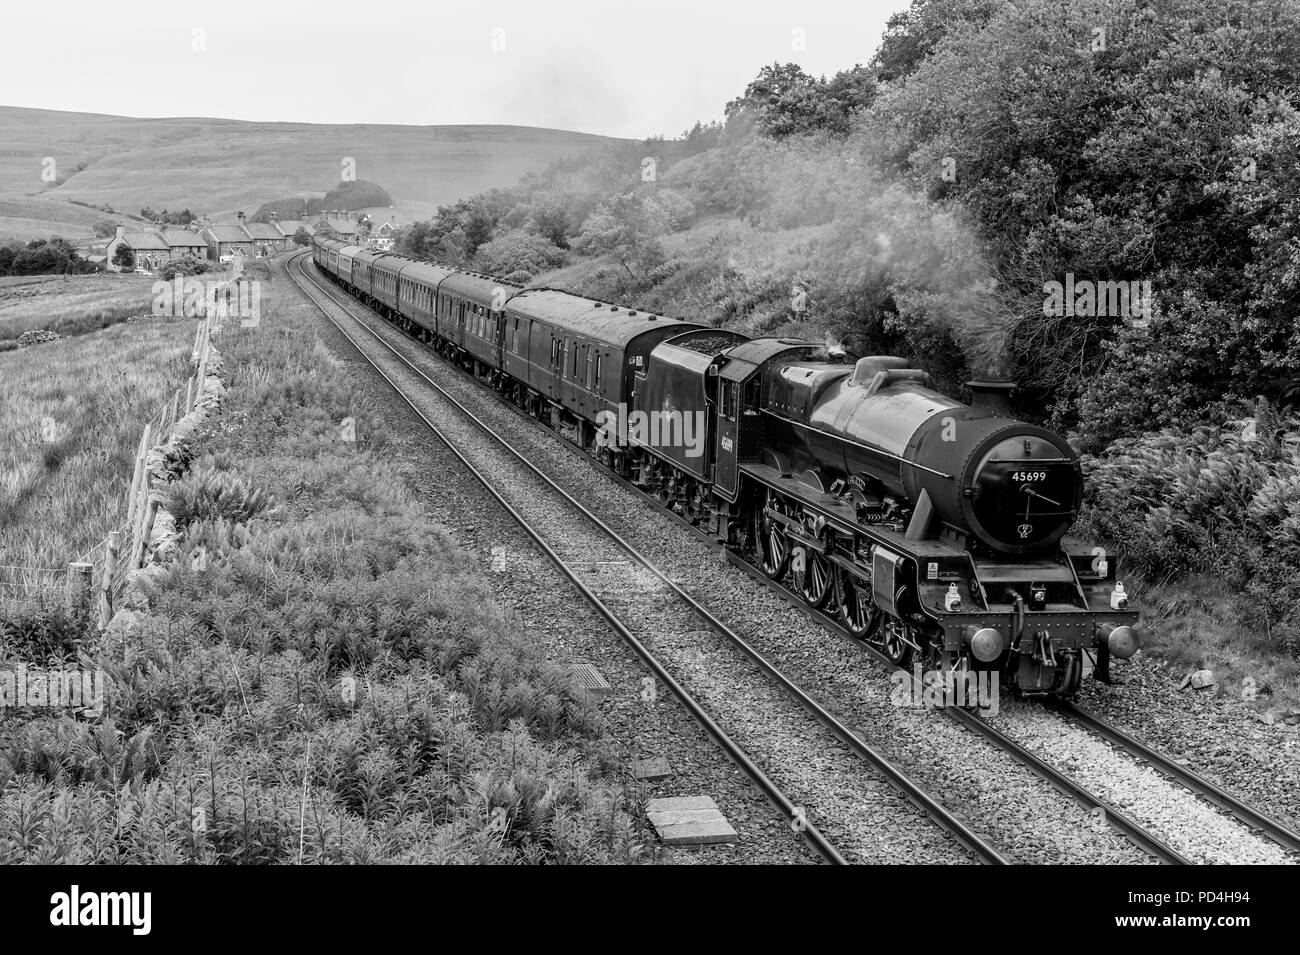 Galatea 45699 Classic steam trains on the Settle to Carlisle railway at Garsdale in the Yorkshire Dales Stock Photo